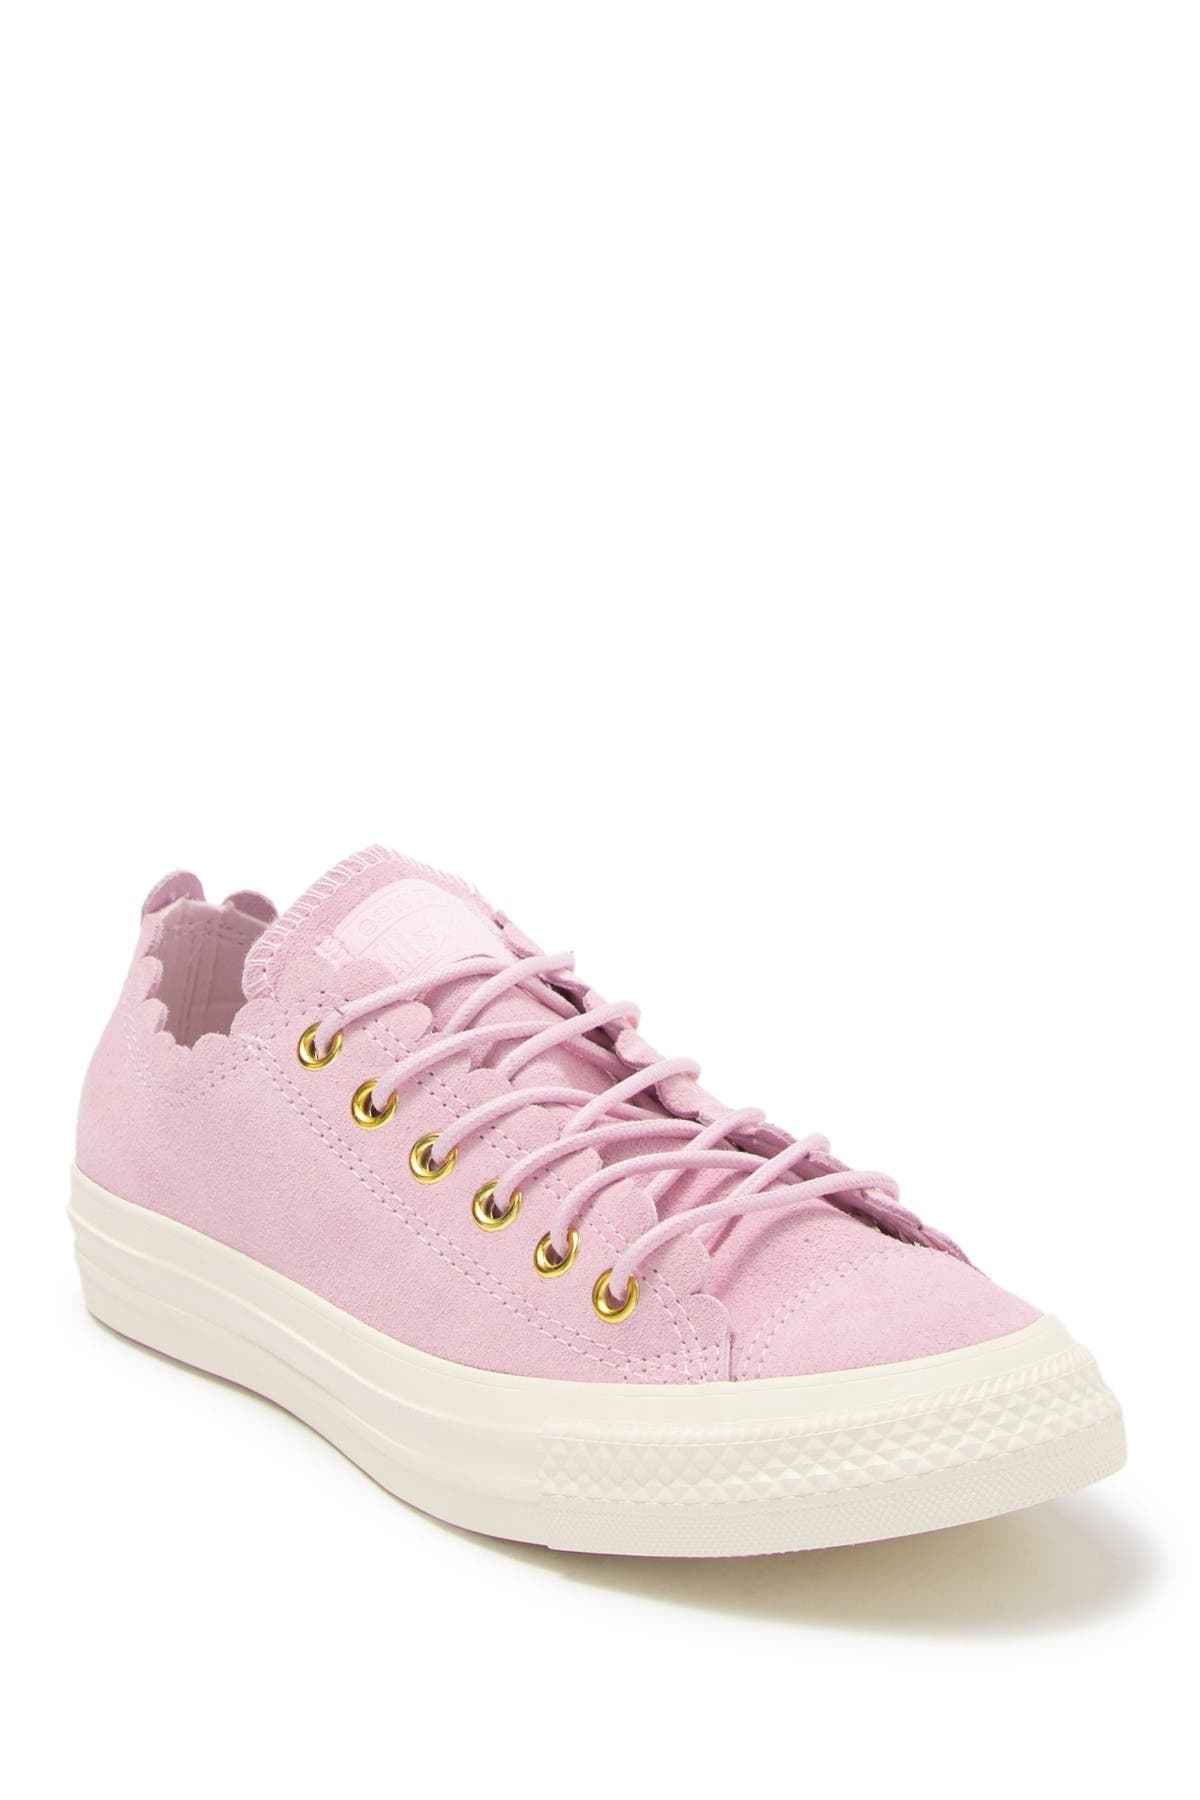 converse chuck taylor frilly thrills